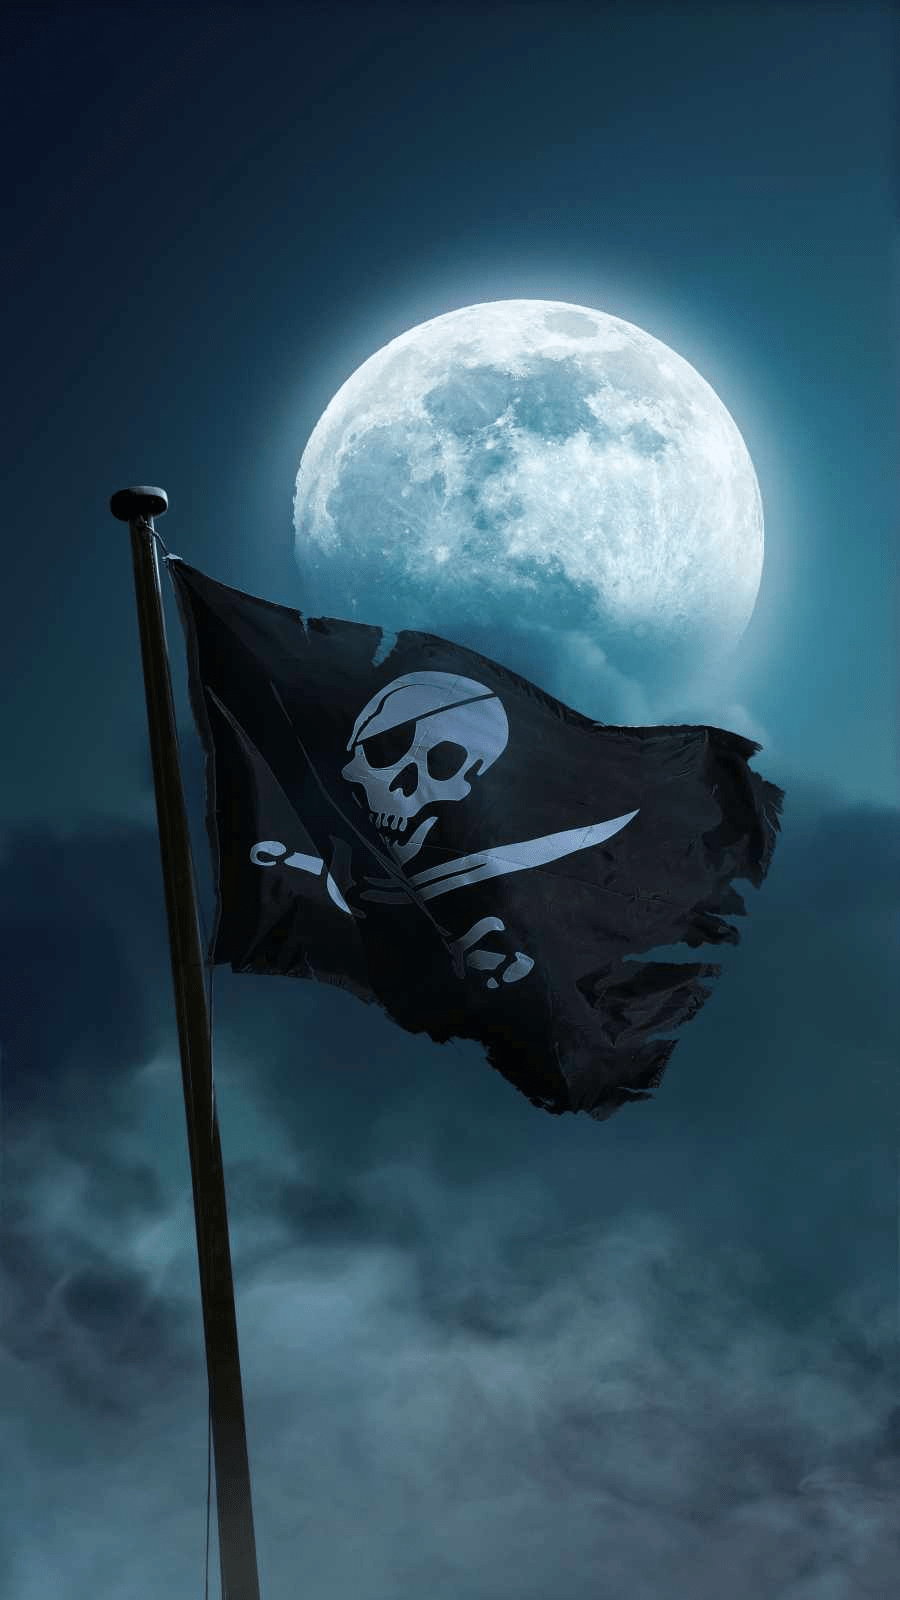 A pirate flag flies in the wind with a full moon in the background. - Pirate